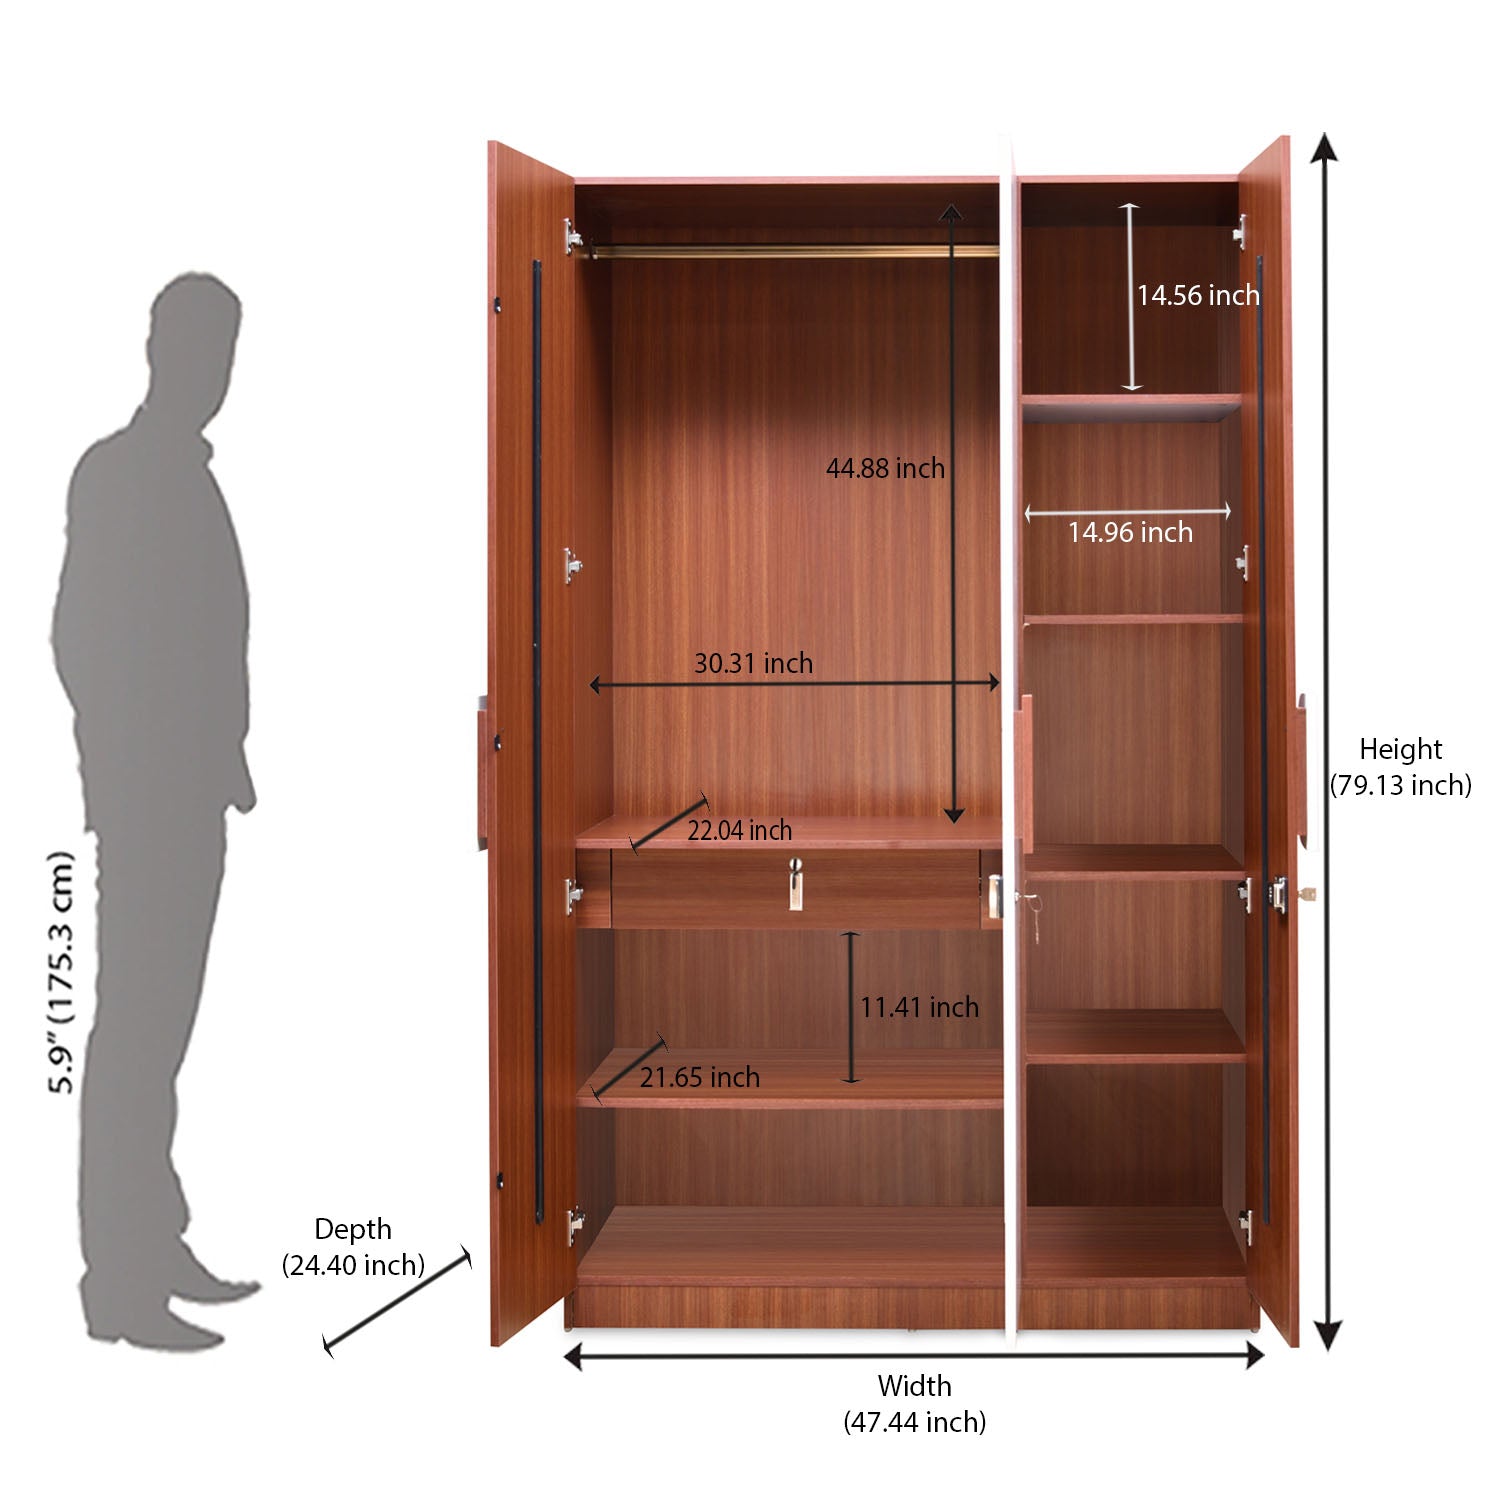 A stylish double closet doors with shelves